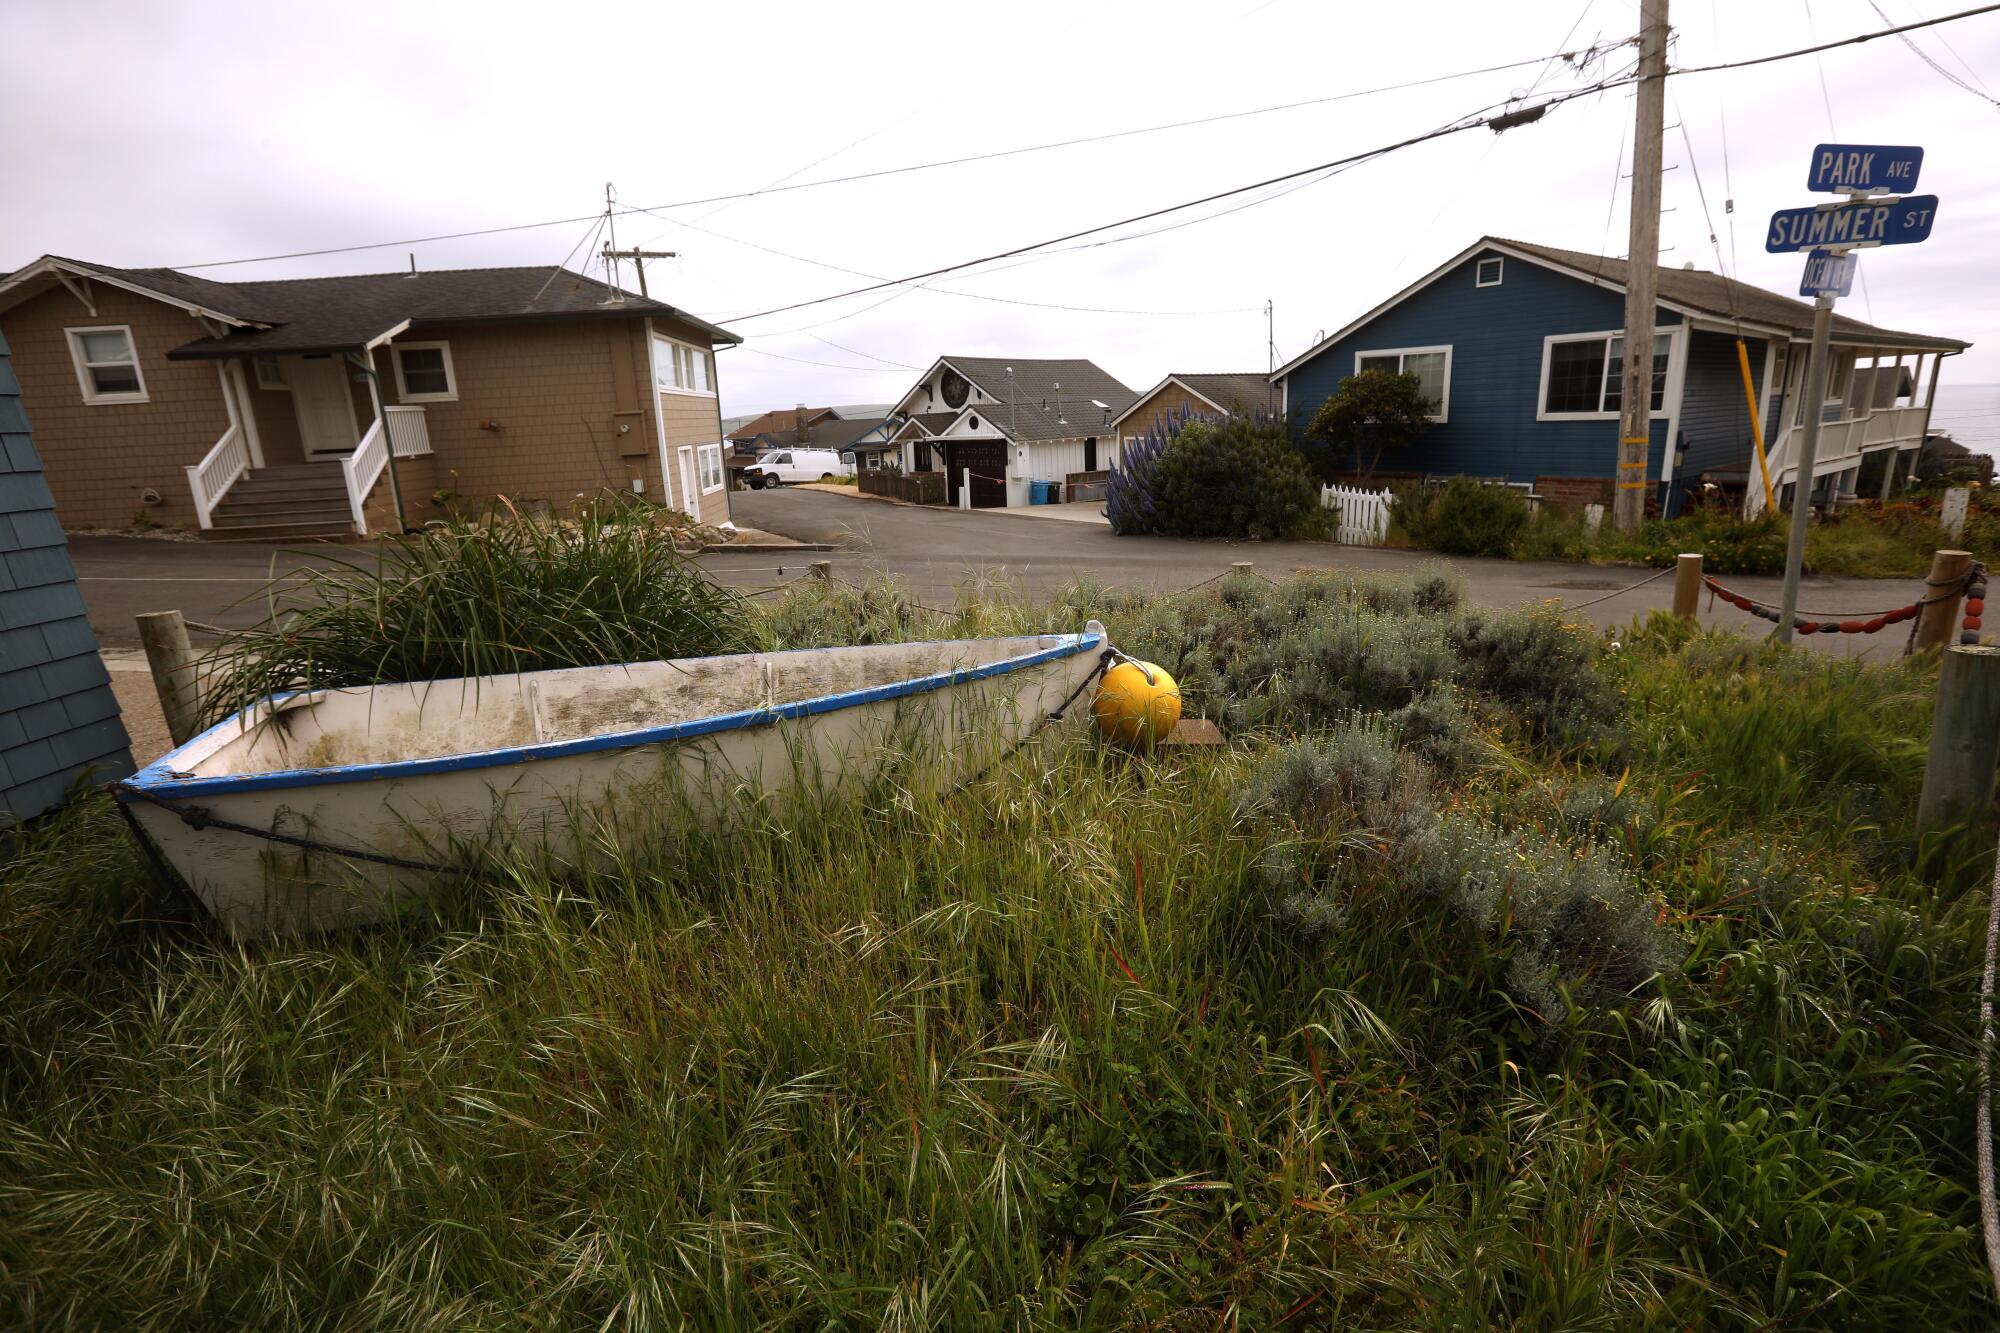 A small boat rests on grass in front of a home.